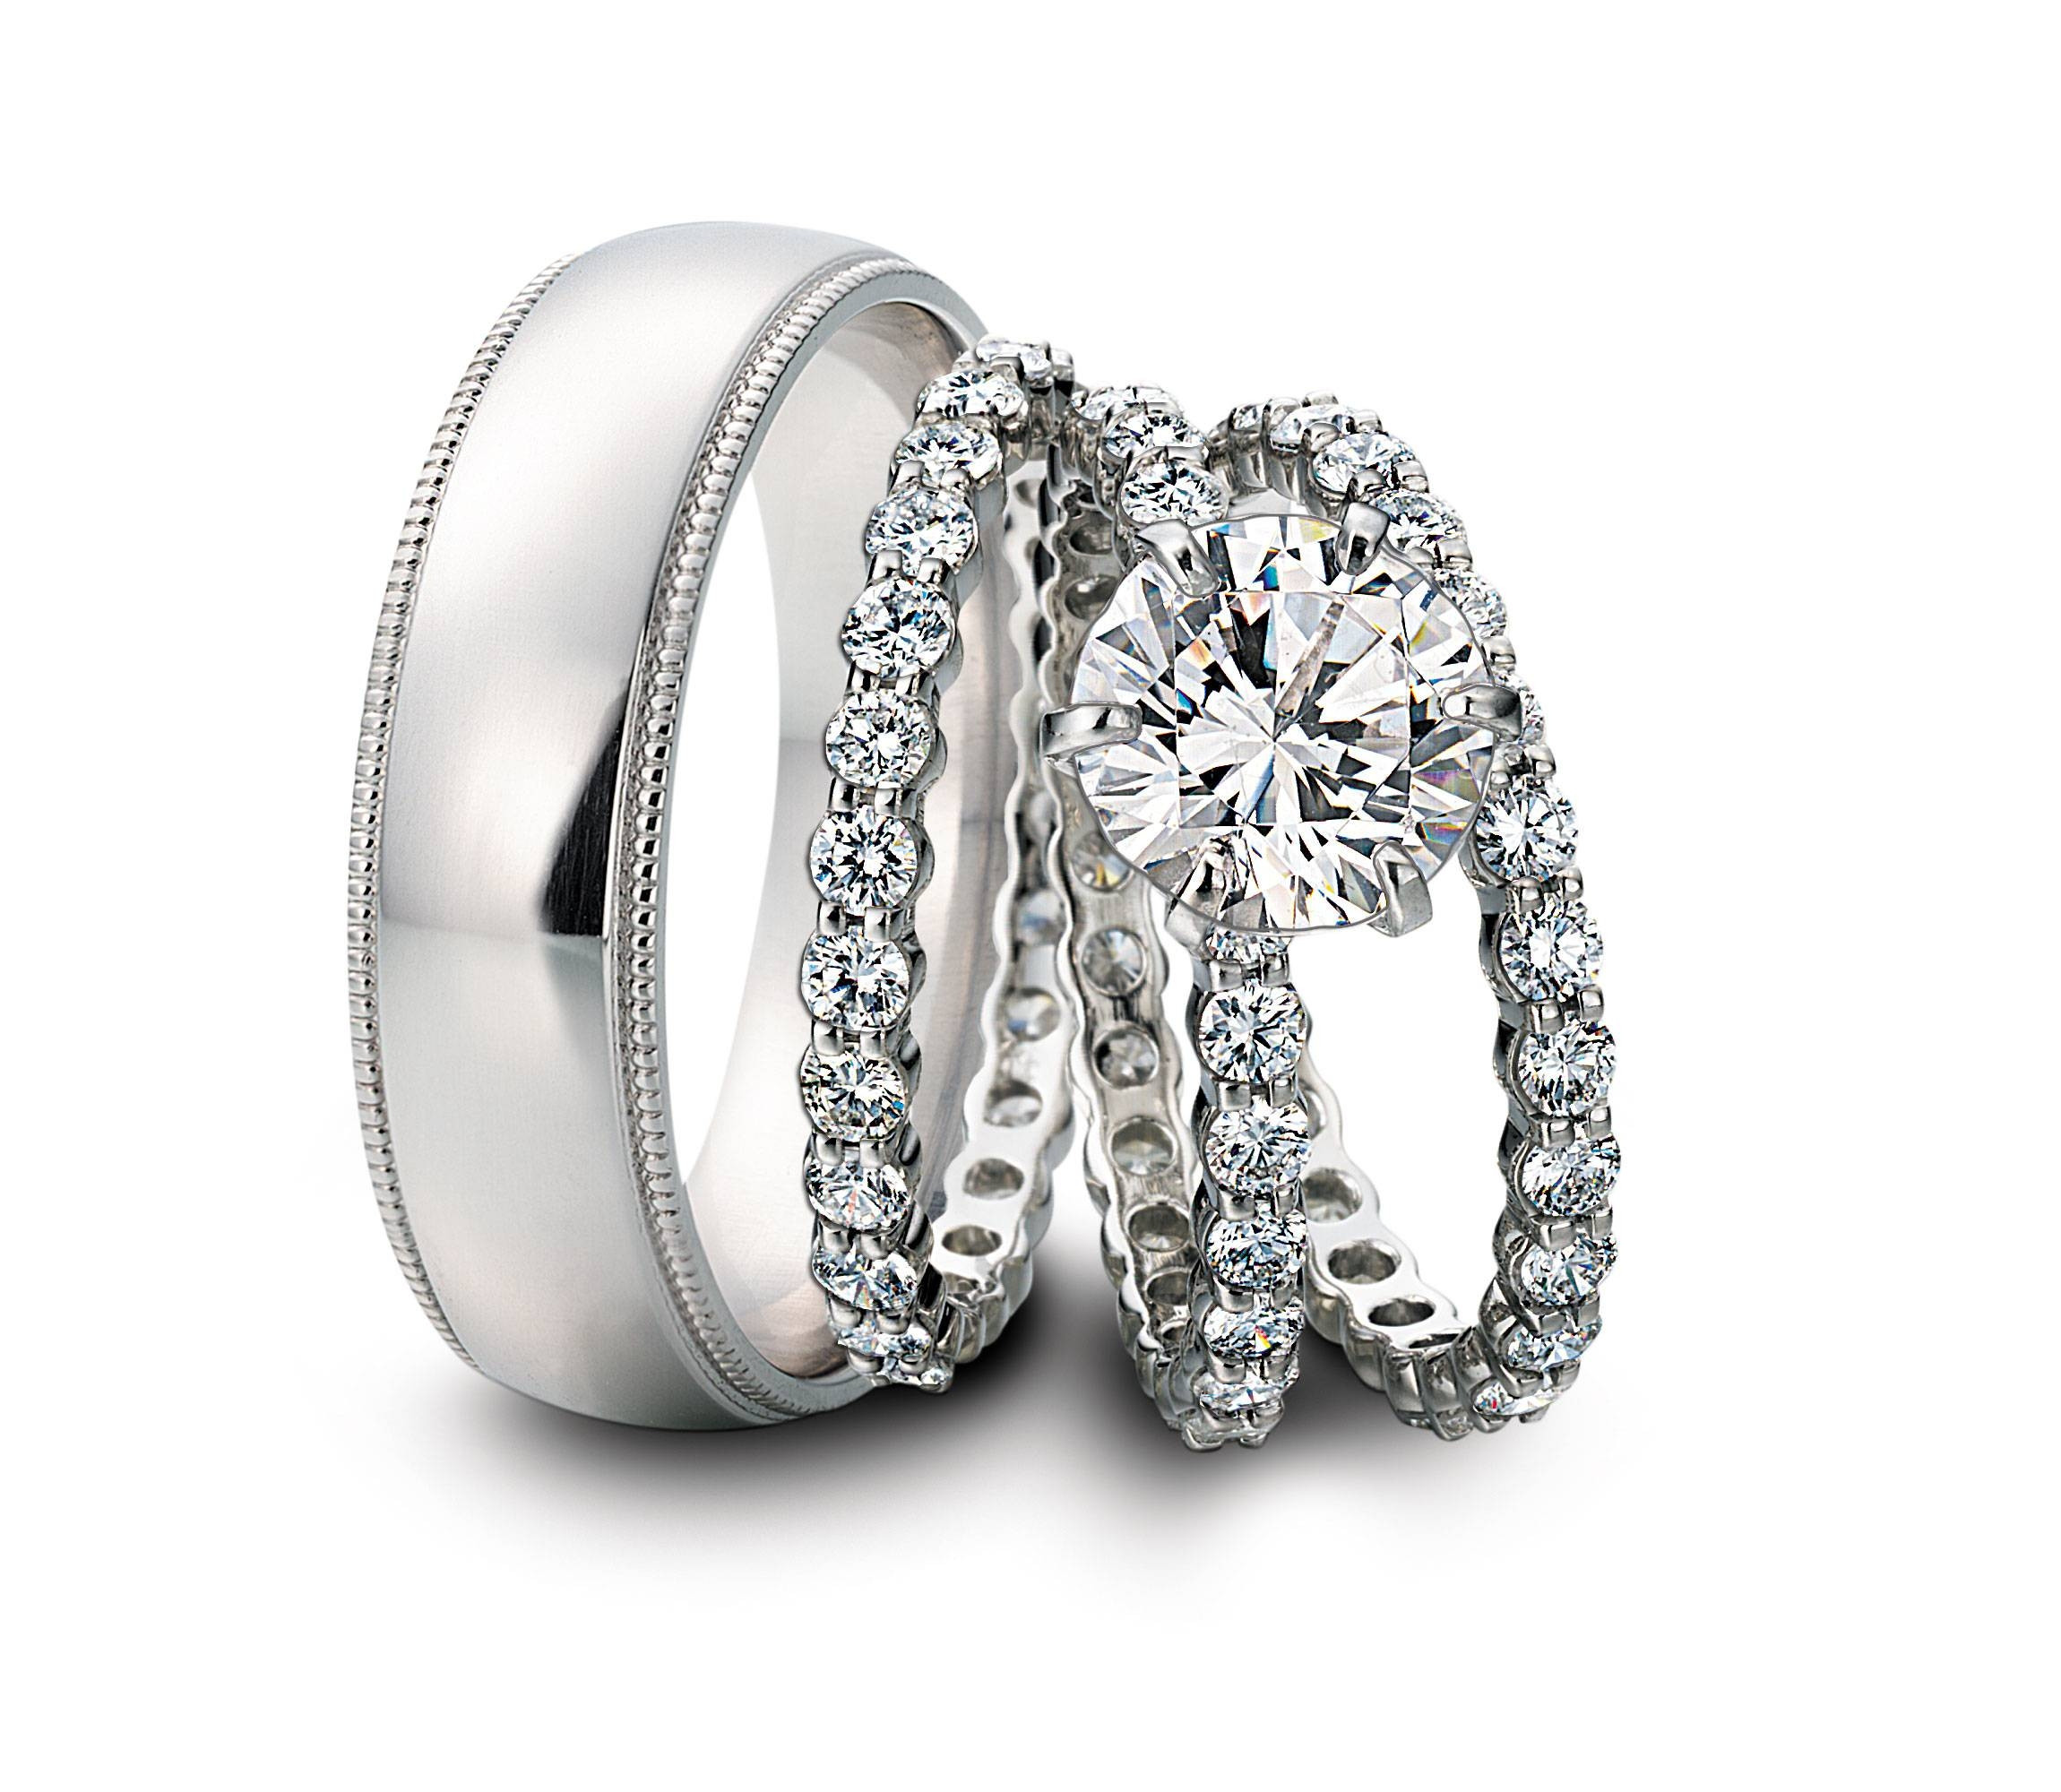 Cheap Wedding Rings For Him And Her
 15 Inspirations of Cheap Wedding Bands Sets His And Hers